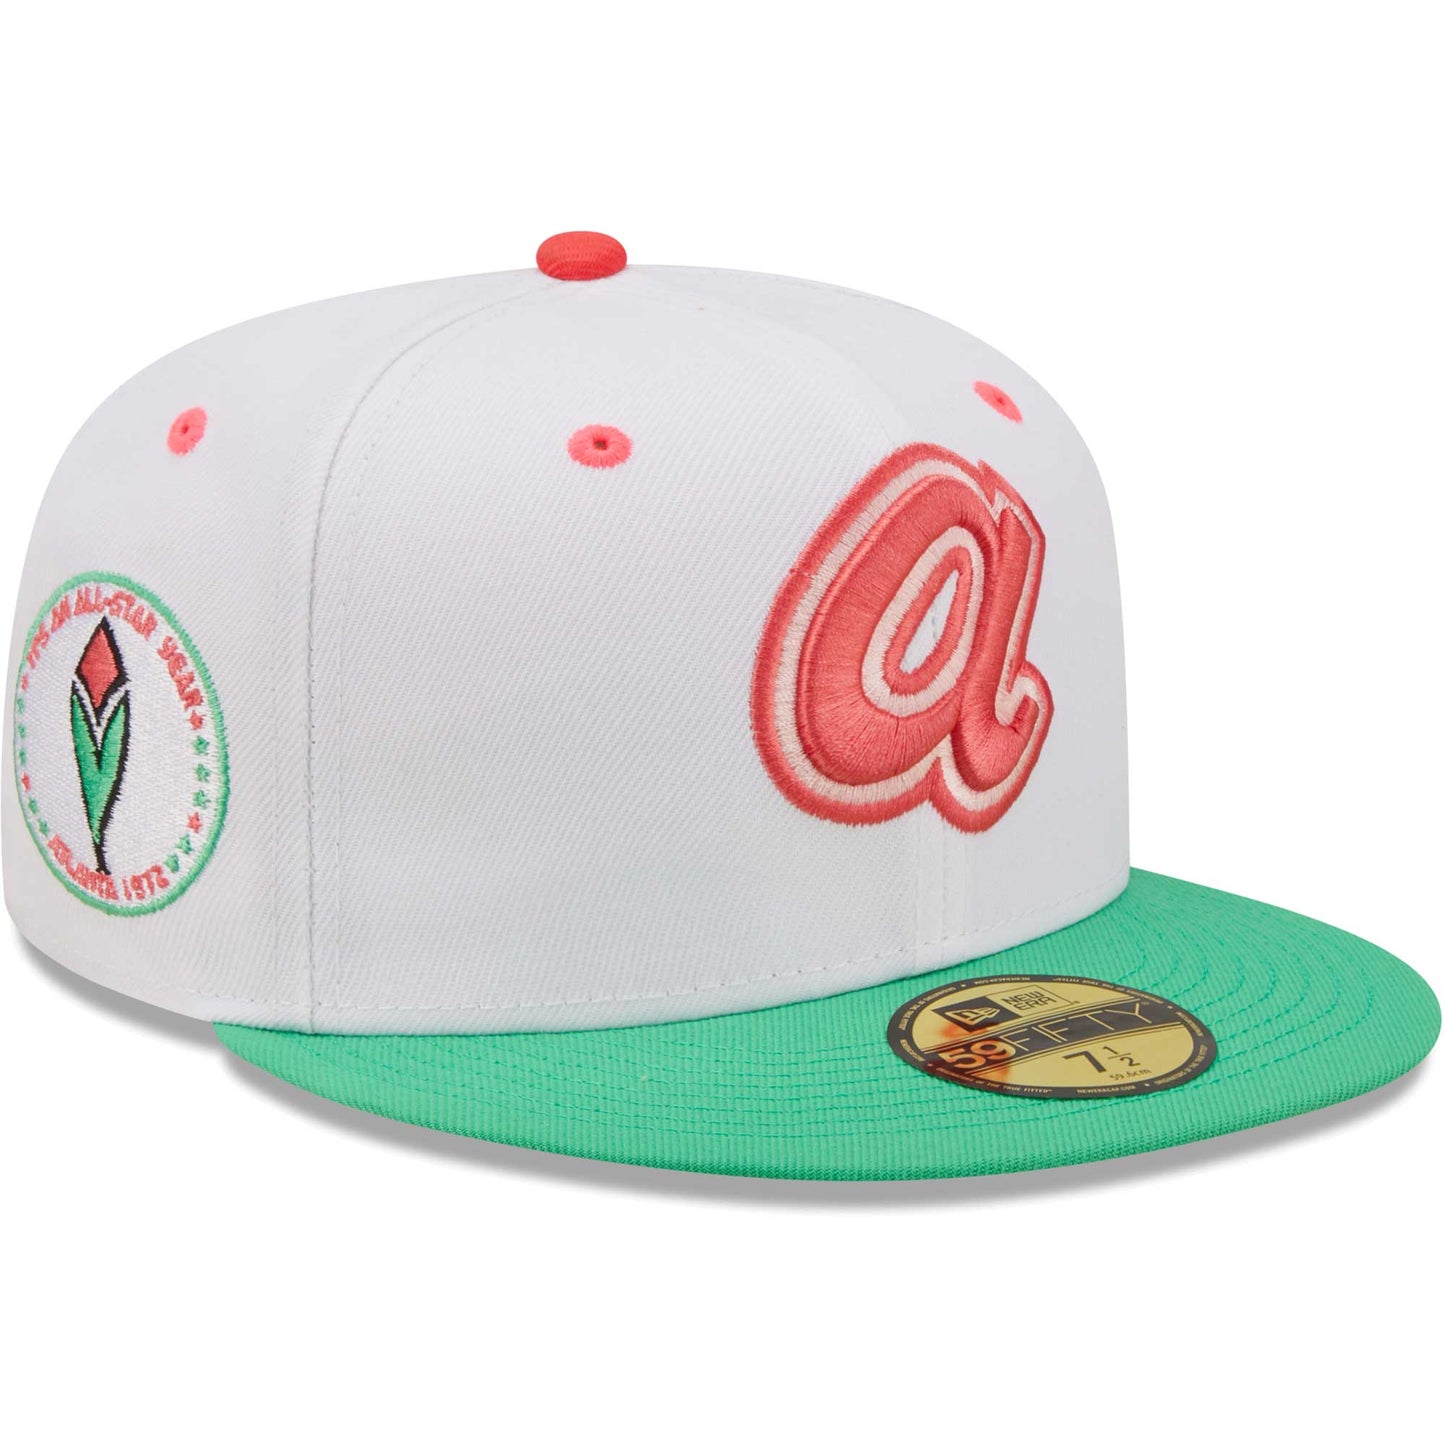 Atlanta Braves New Era 1972 MLB All-Star Game Watermelon Lolli 59FIFTY Fitted Hat - White/Green